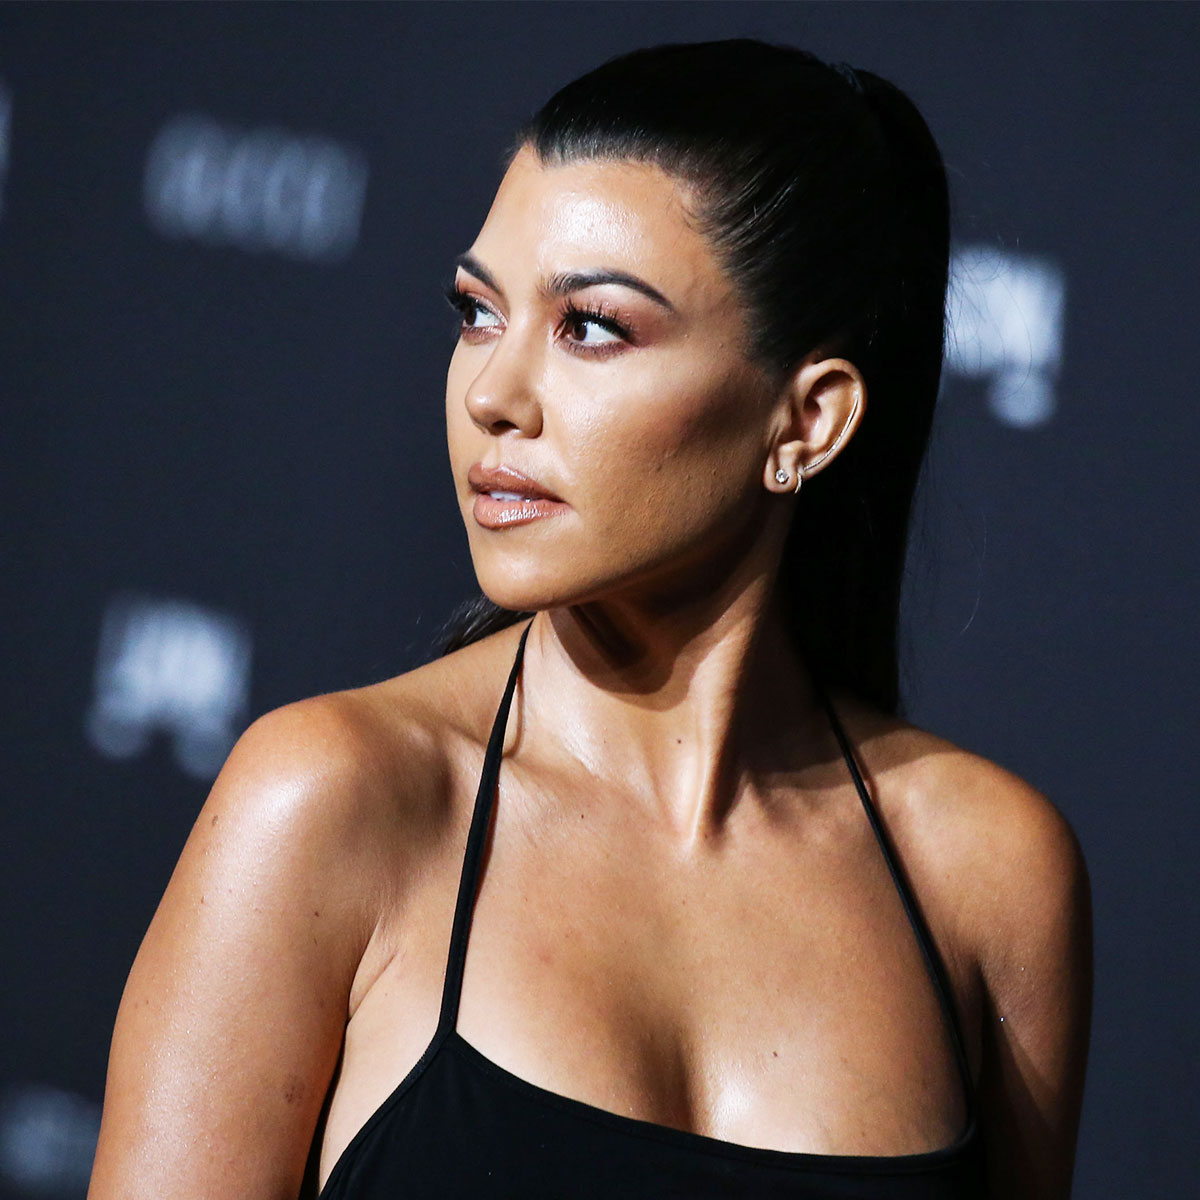 Kourtney Kardashian Hospitalized And Released At 7 Months Pregnant